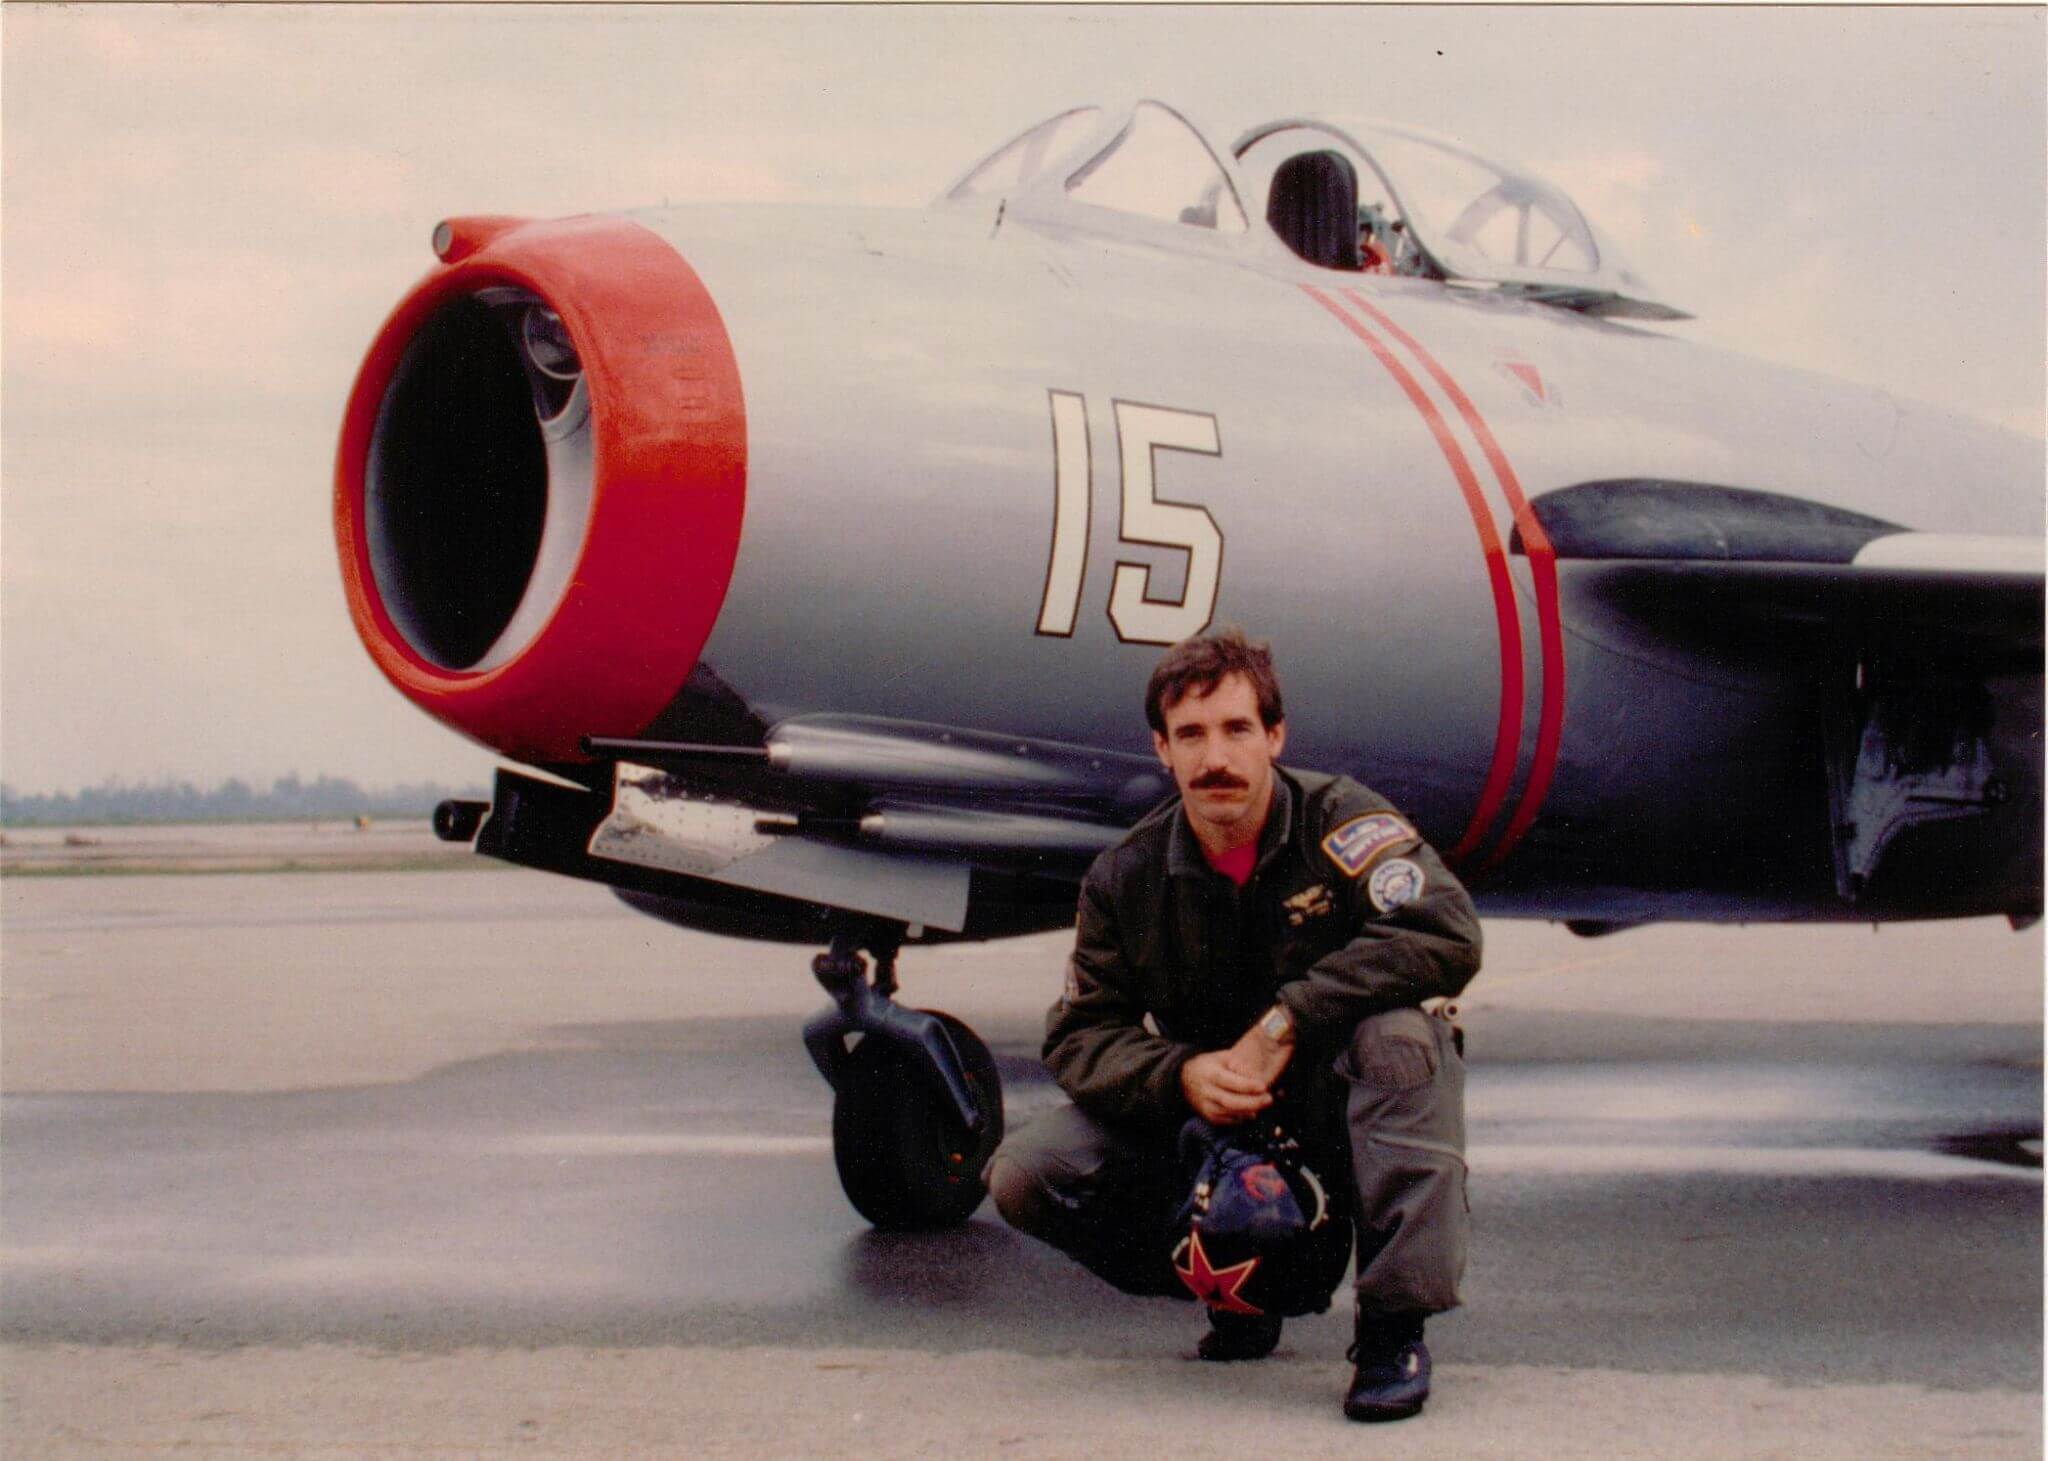 Paul Entrekin, Author of Mr. MiG-15, posing with his MiG on the ramp